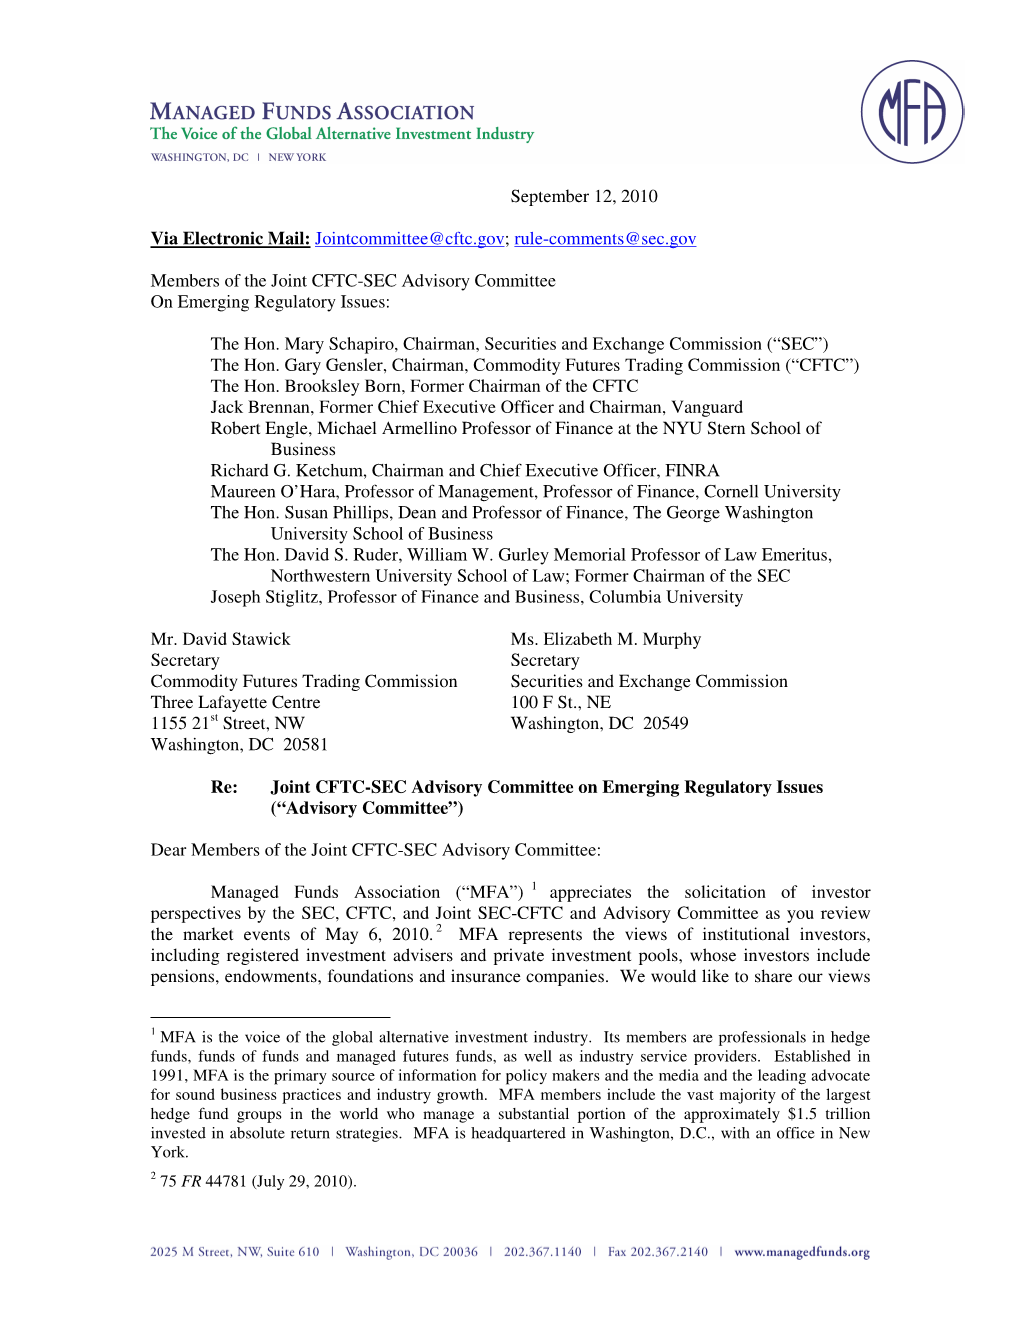 September 12, 2010 Via Electronic Mail: Jointcommittee@Cftc.Gov; Rule